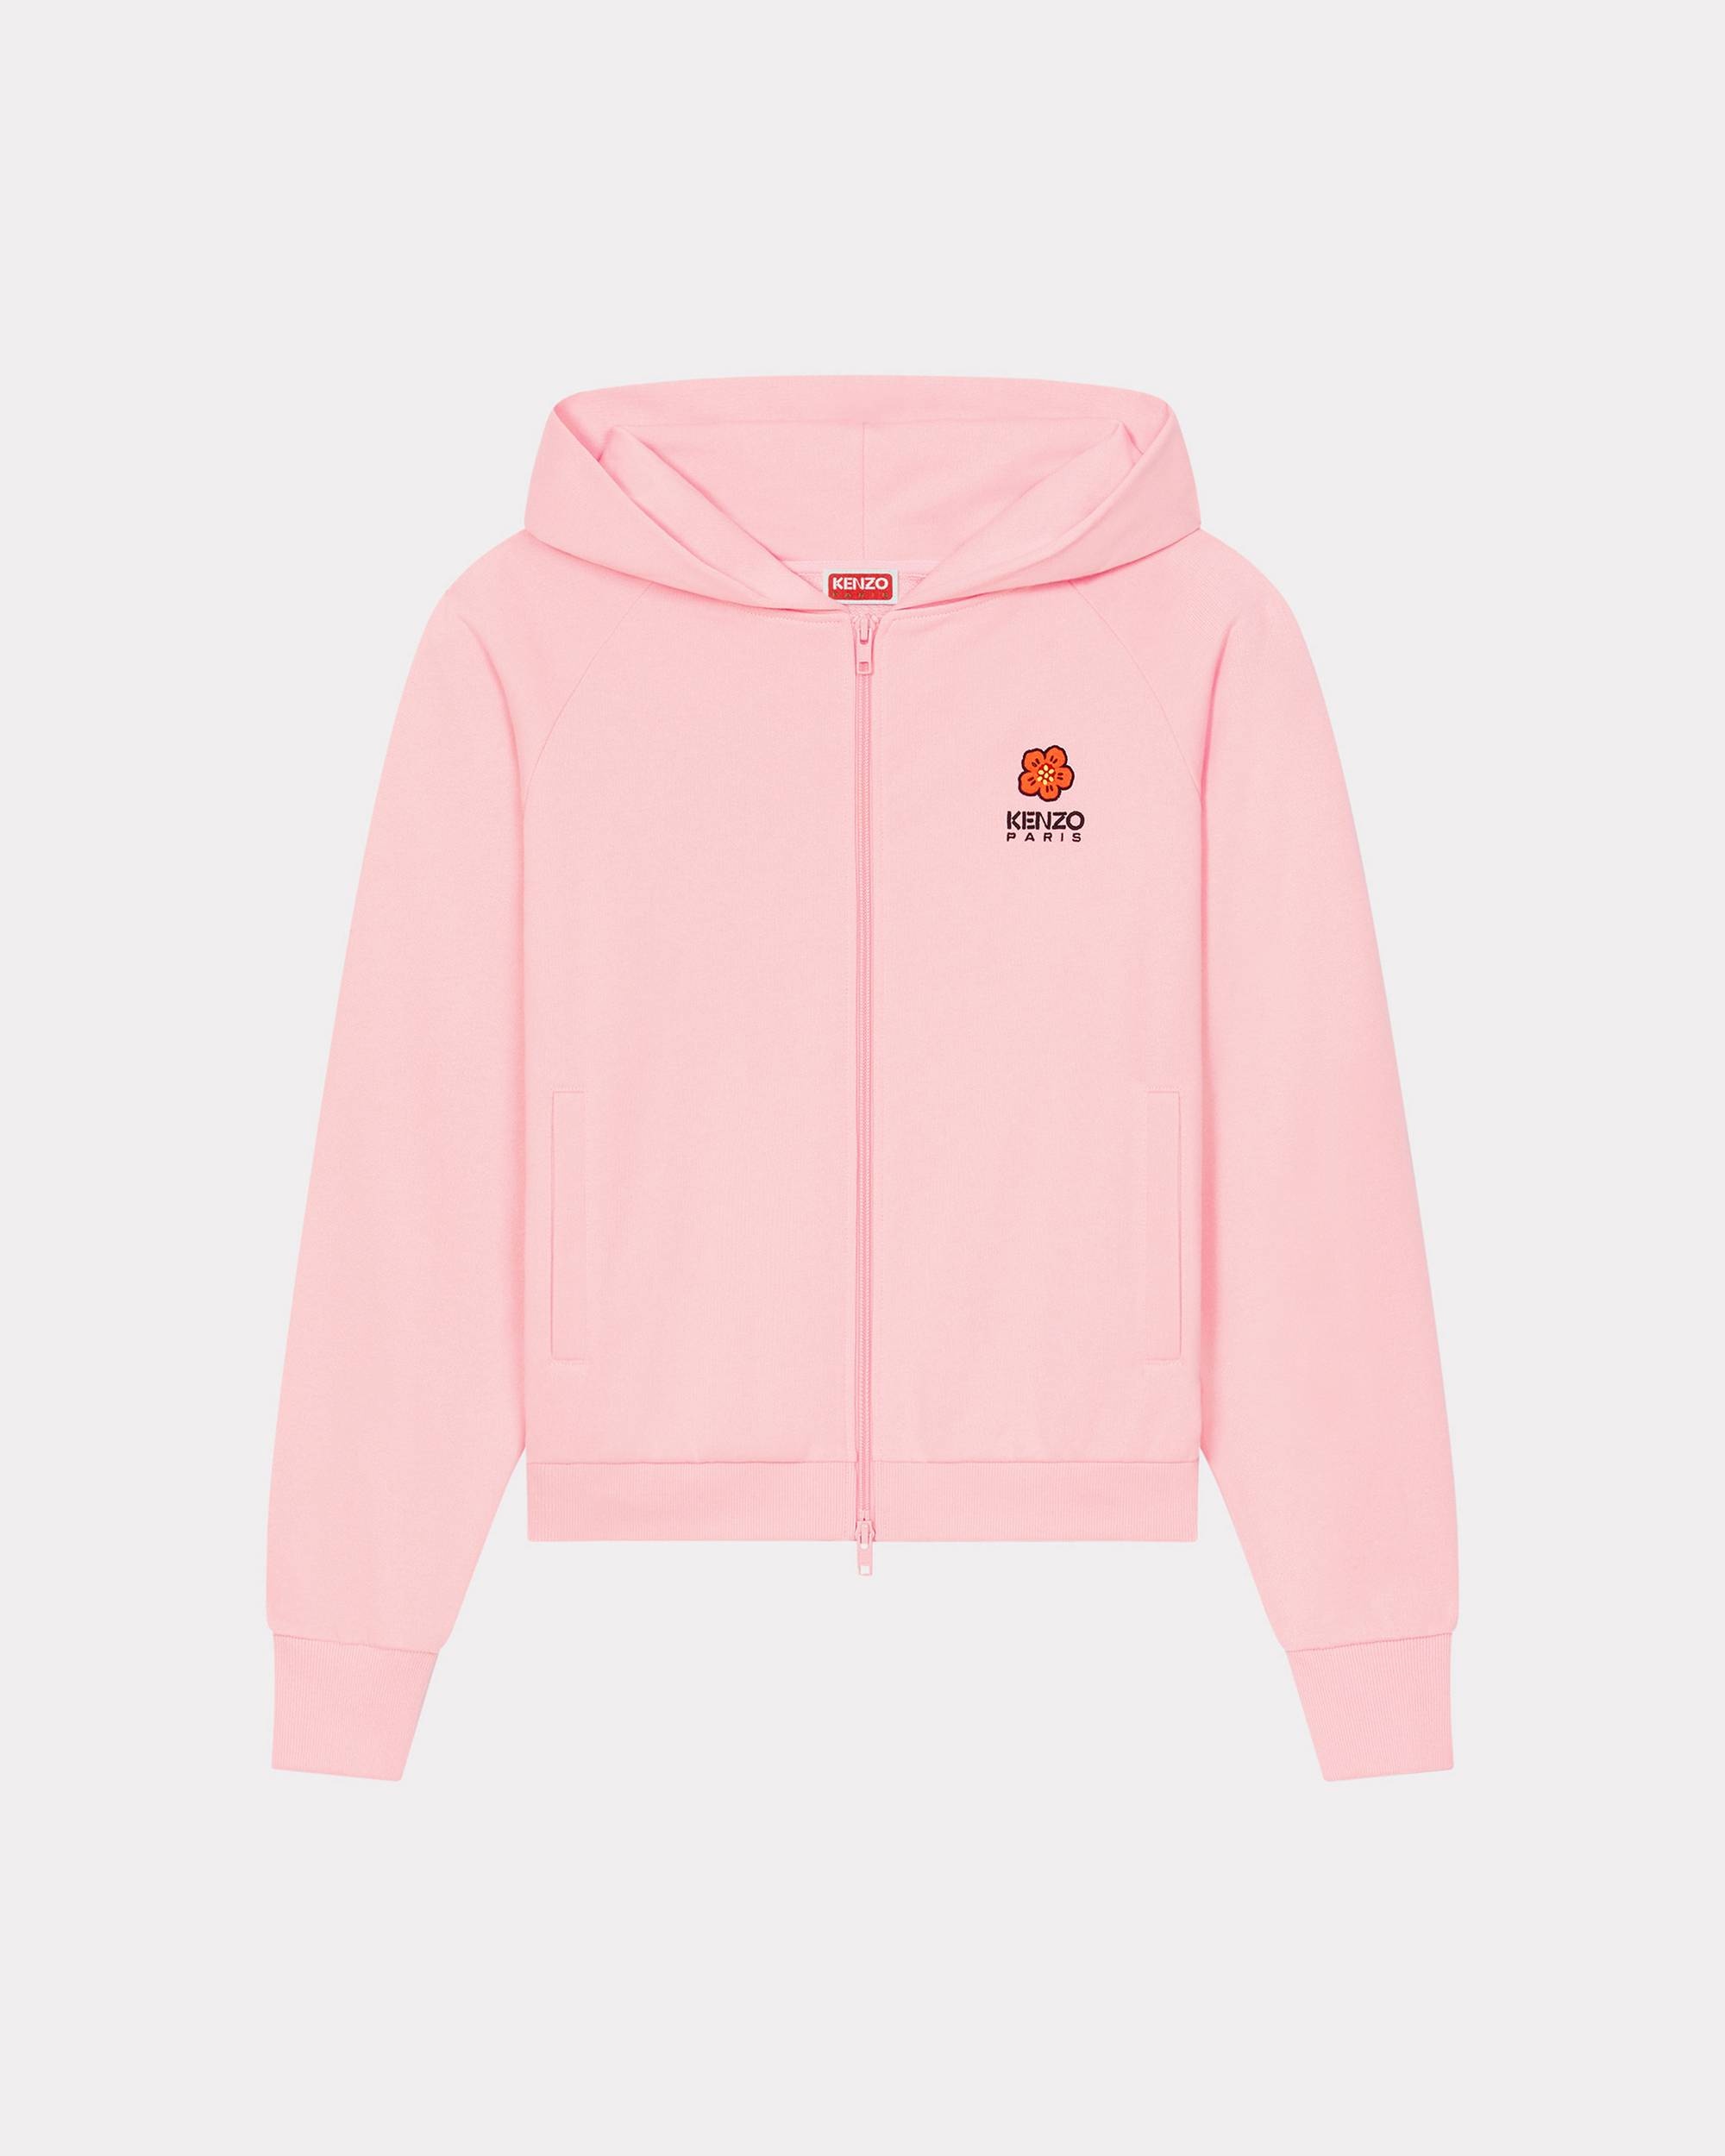 'Boke Flower Crest' hooded embroidered zip-up cardigan - 1